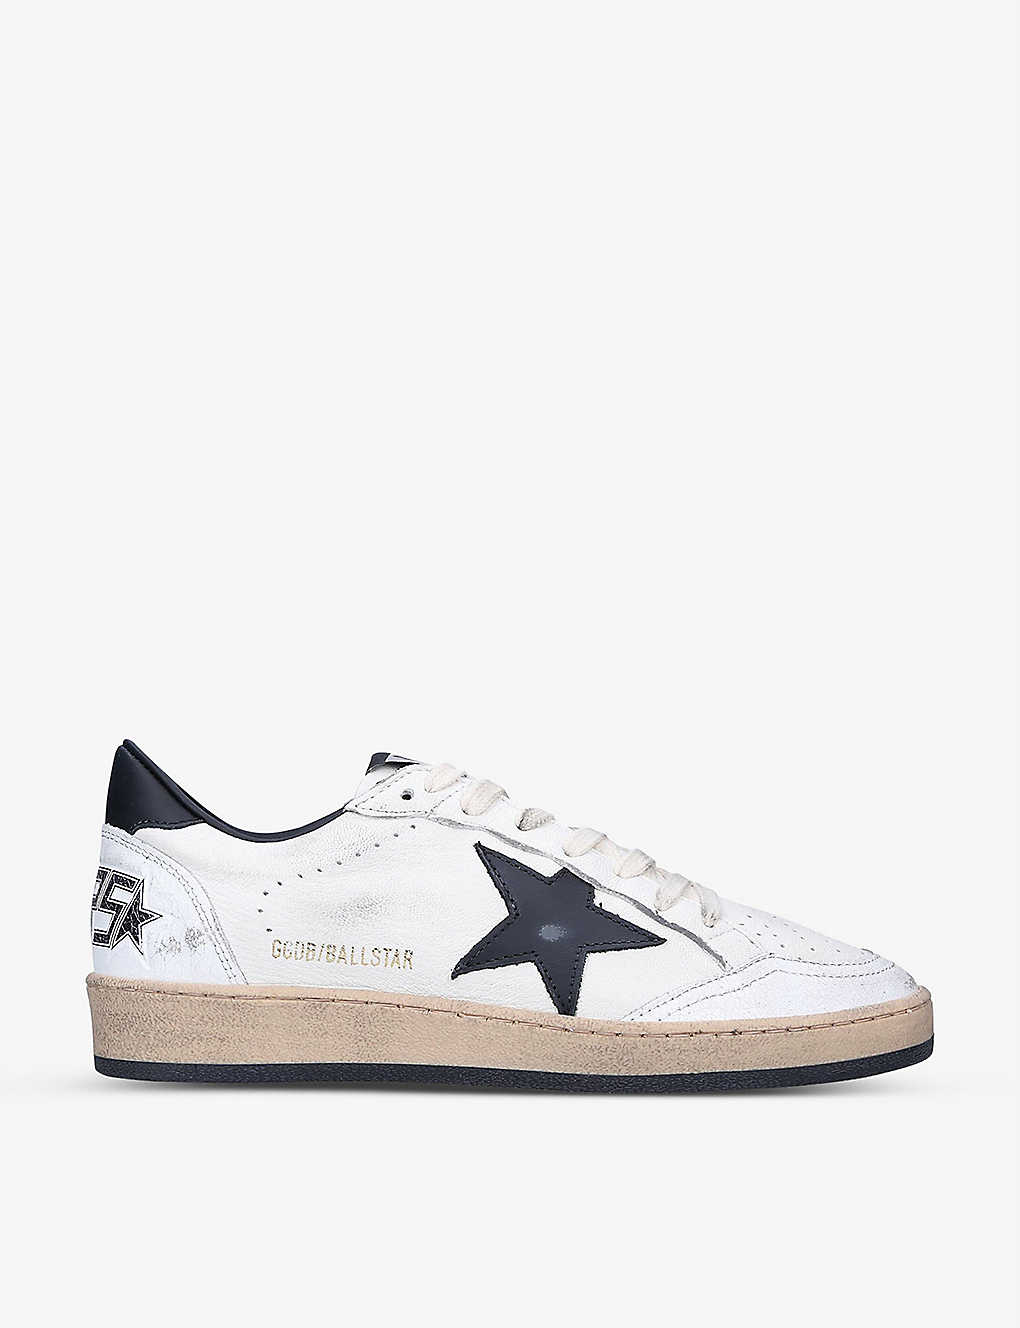 Golden Goose Ball Star 10283 Leather Low-top Trainers In White/blk